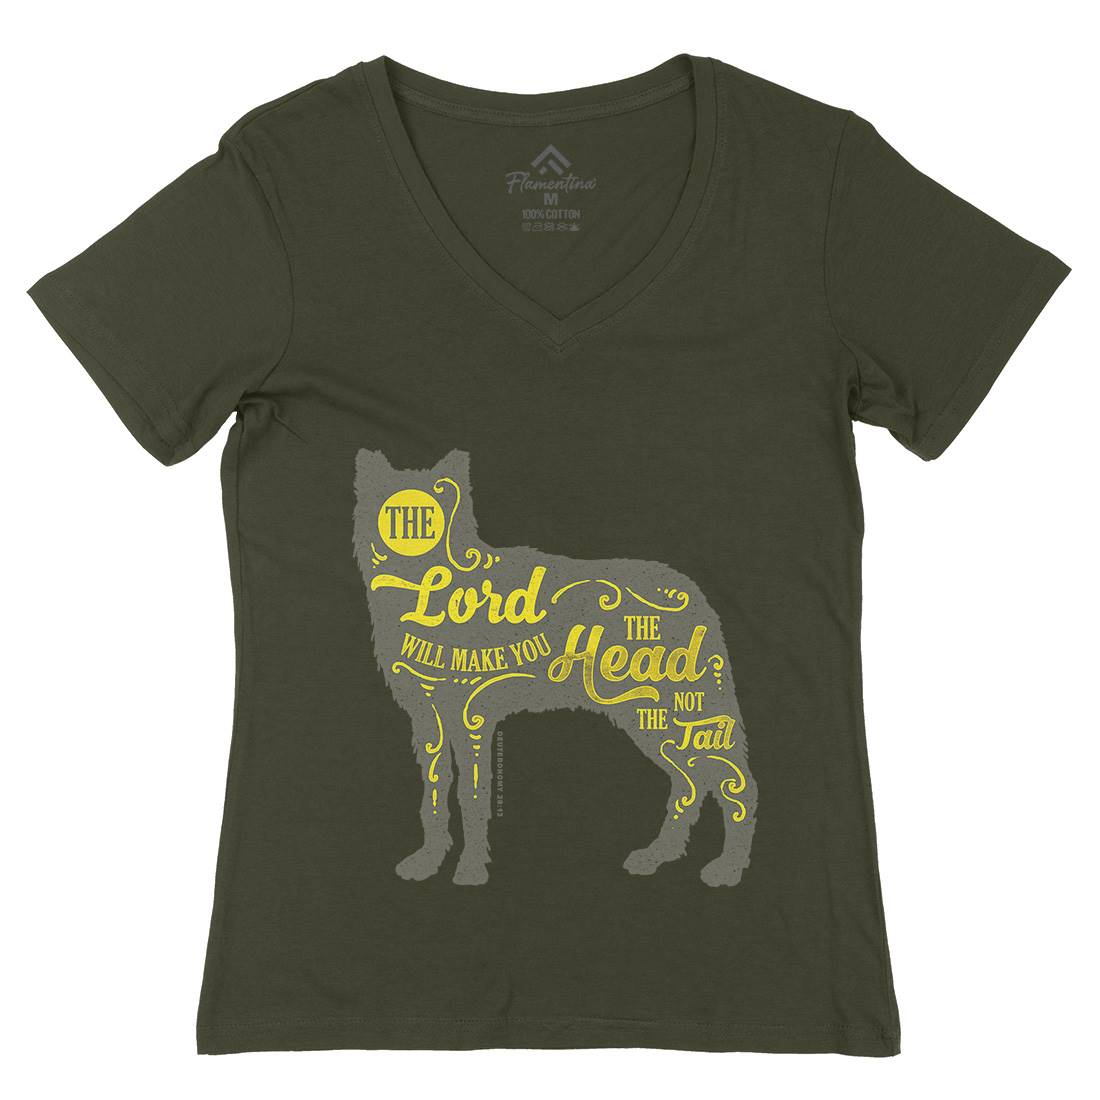 Head Not The Tail Womens Organic V-Neck T-Shirt Religion A326